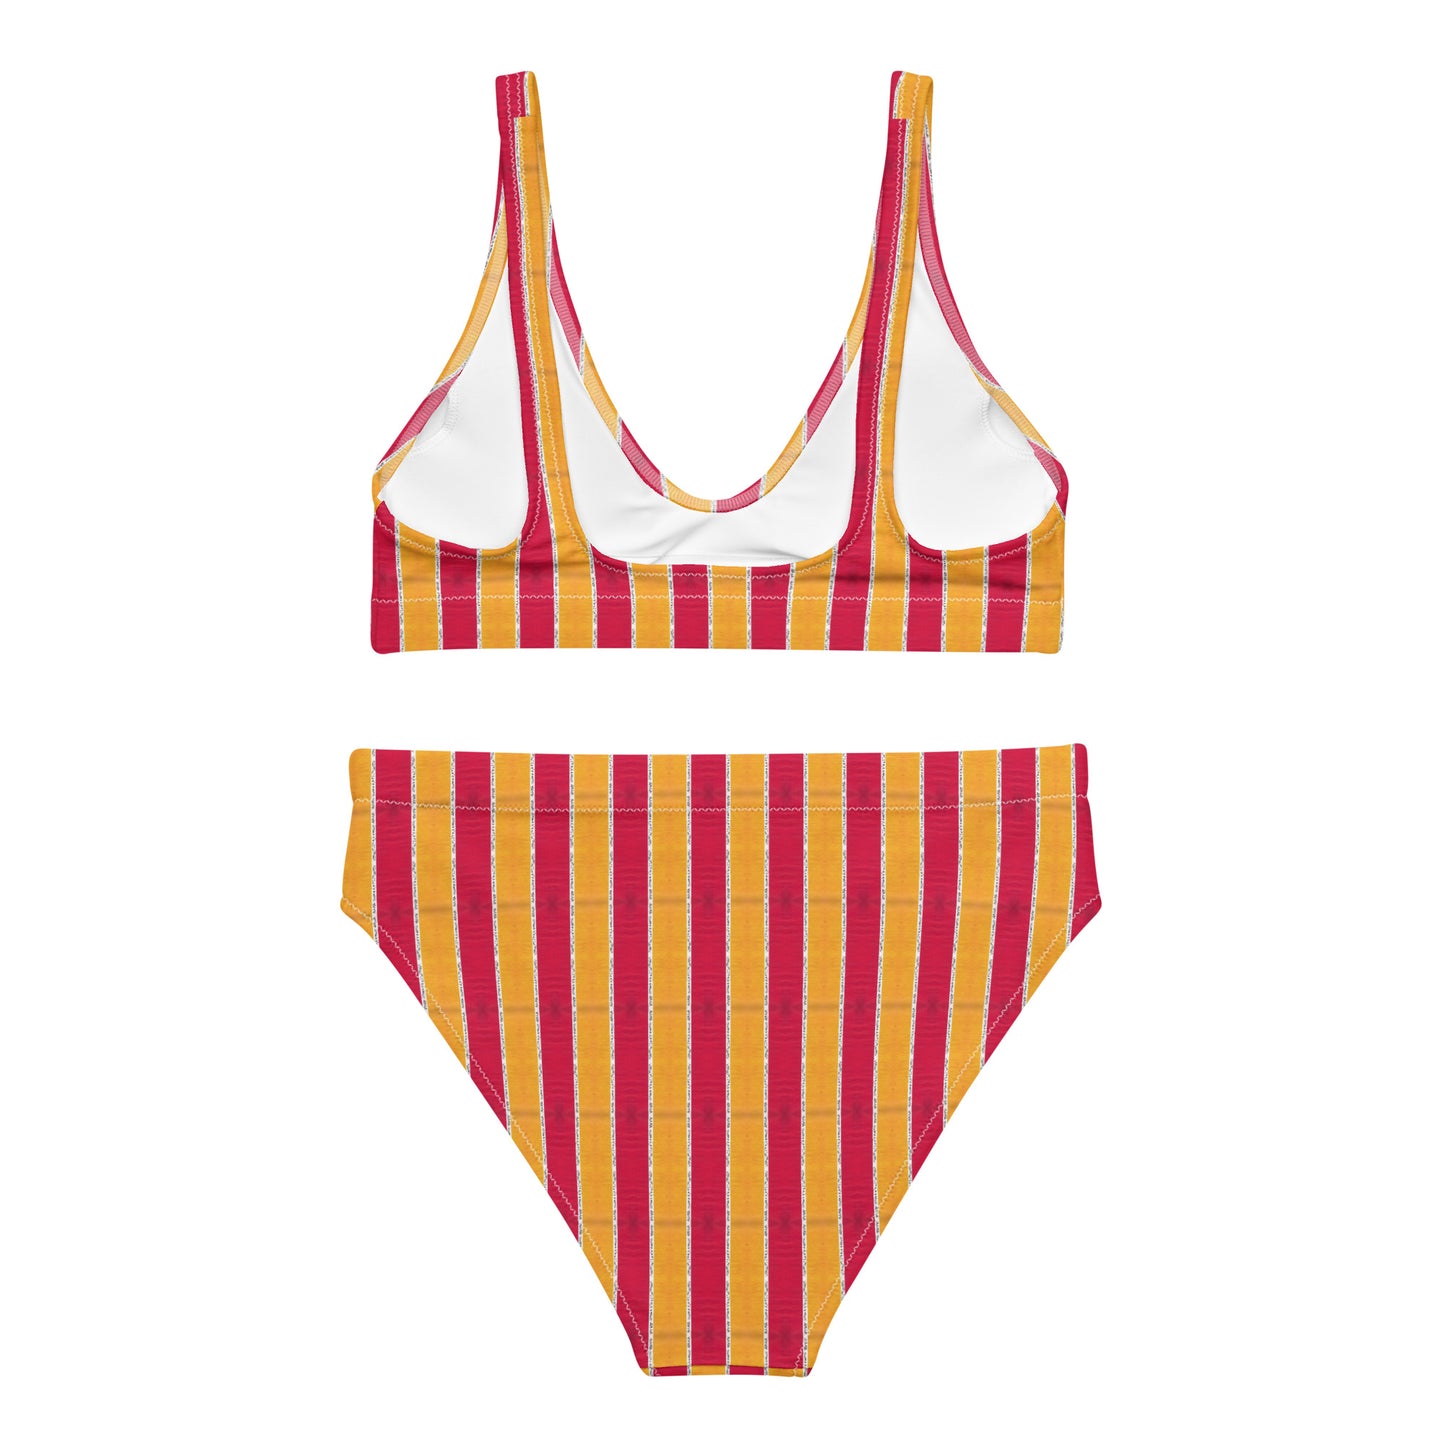 ANOA - High-waisted eco-responsible swimsuit